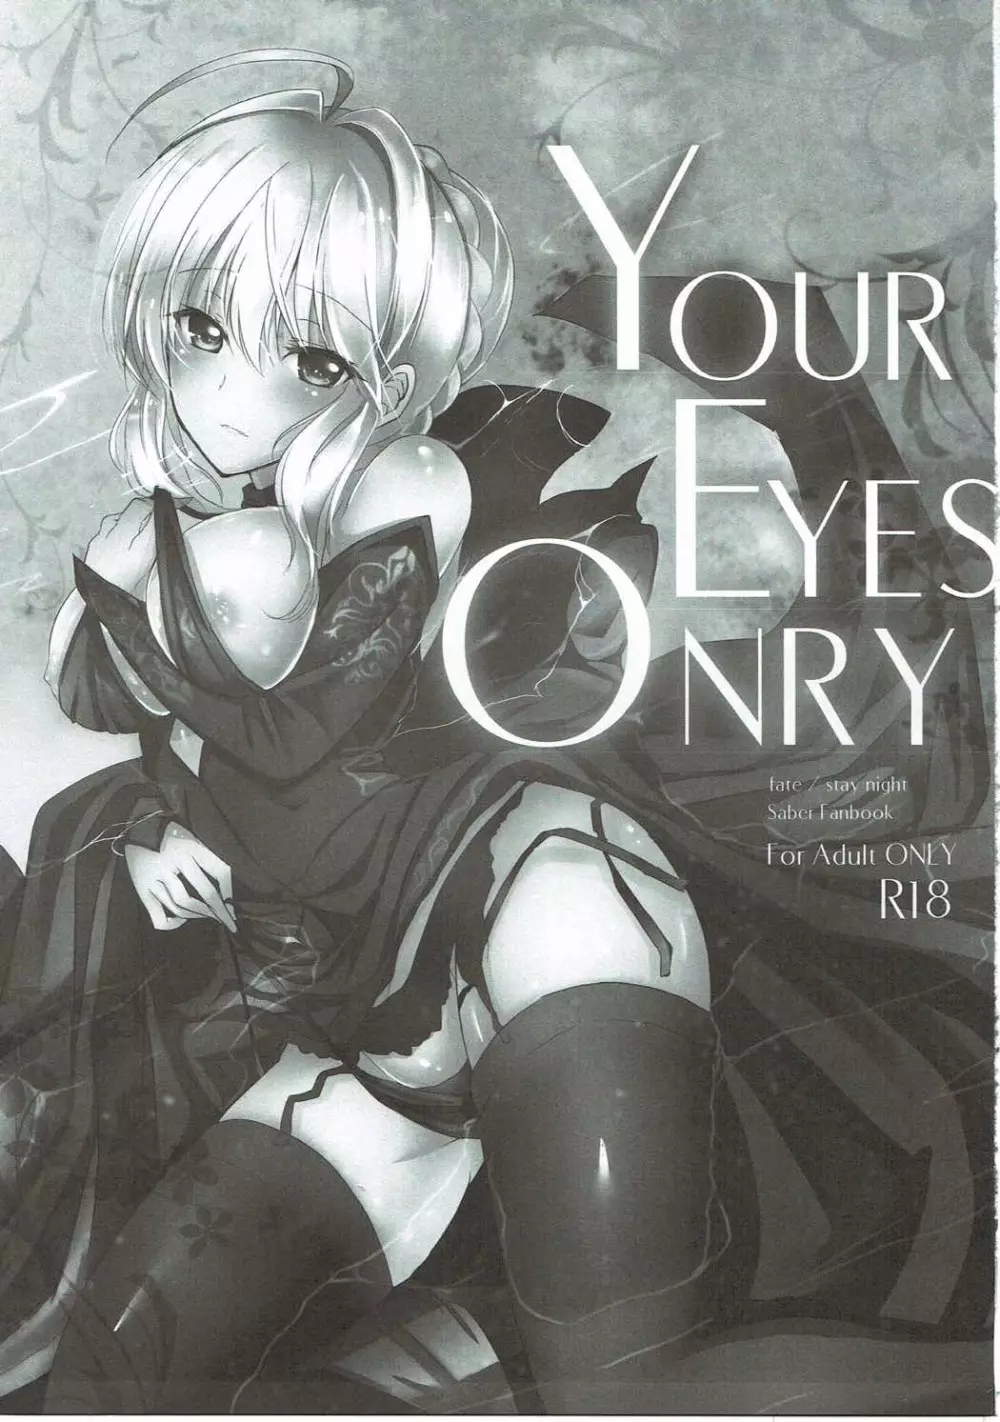 YOUR EYES ONRY 2ページ